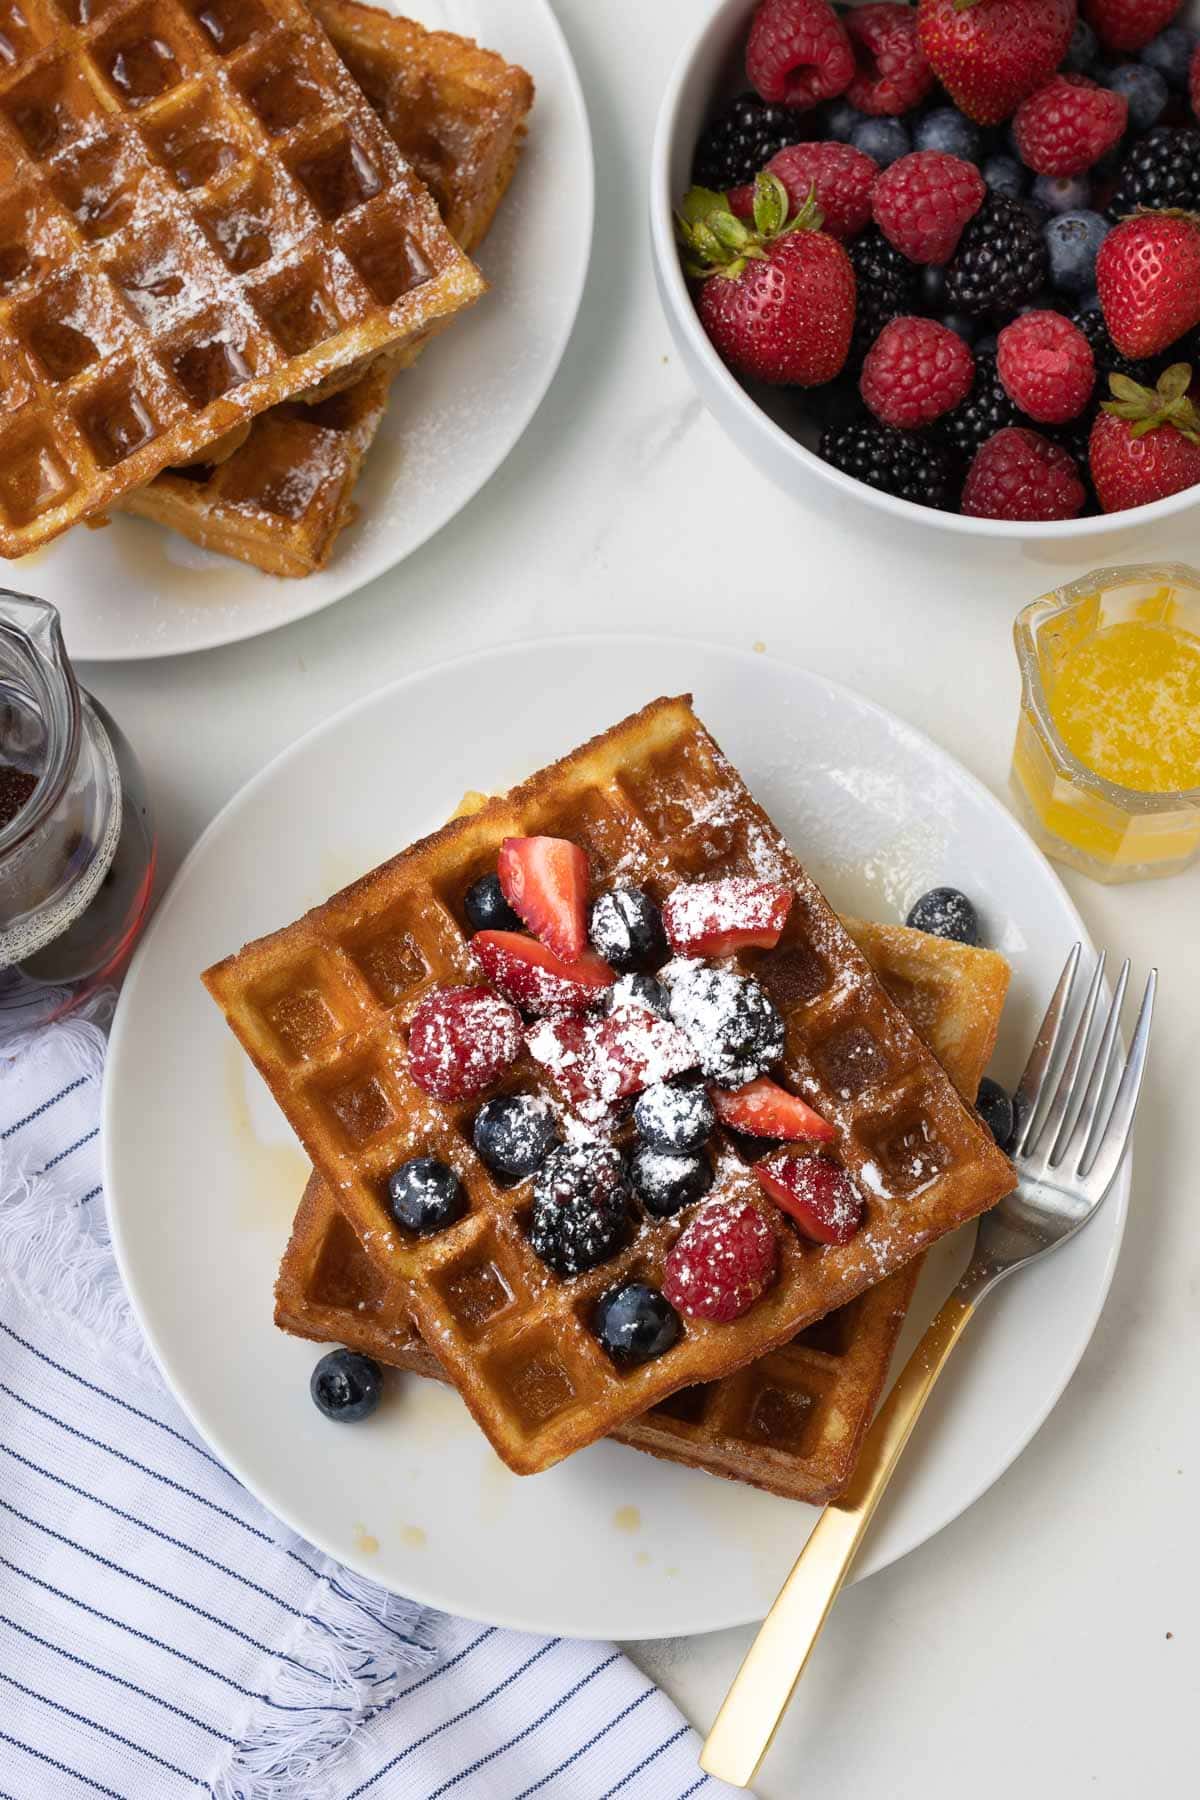 Plates of golden Belgian waffles with fresh berries and maple syrup.
